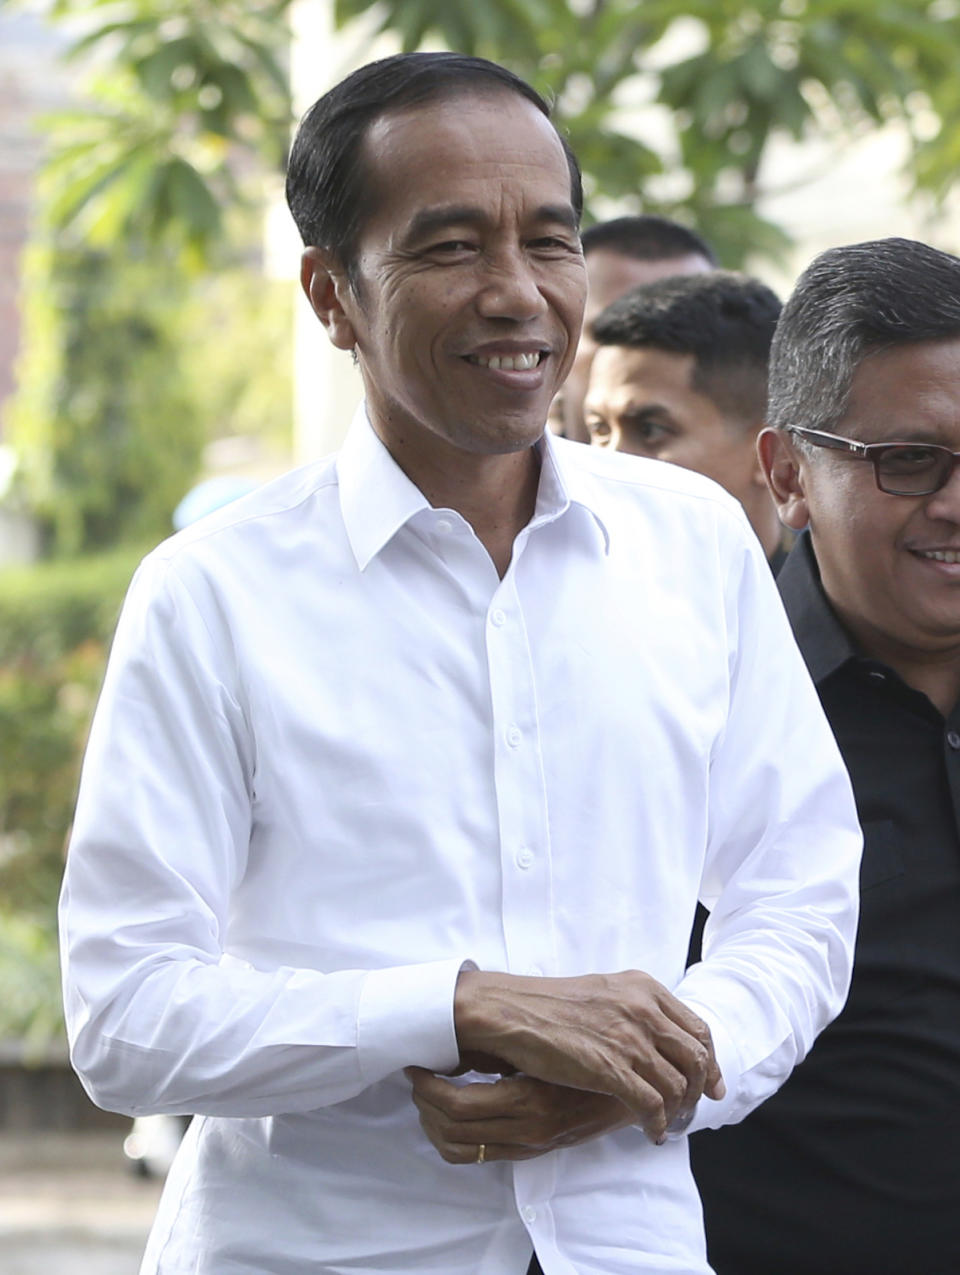 Incumbent Indonesian President Joko Widodo walks with Secretary General of Indonesian Democratic Party-Struggle Hasto Kristiyanto, right, upon arrival for a meeting with leaders of his coalition parties in Jakarta, Indonesia, Thursday, April 18, 2019. Widodo said Thursday he was won re-election after receiving an estimated 54% of the vote, backtracking on an earlier vow to wait for official results after his challenger made improbable claims of victory. (AP Photo/Achmad Ibrahim)